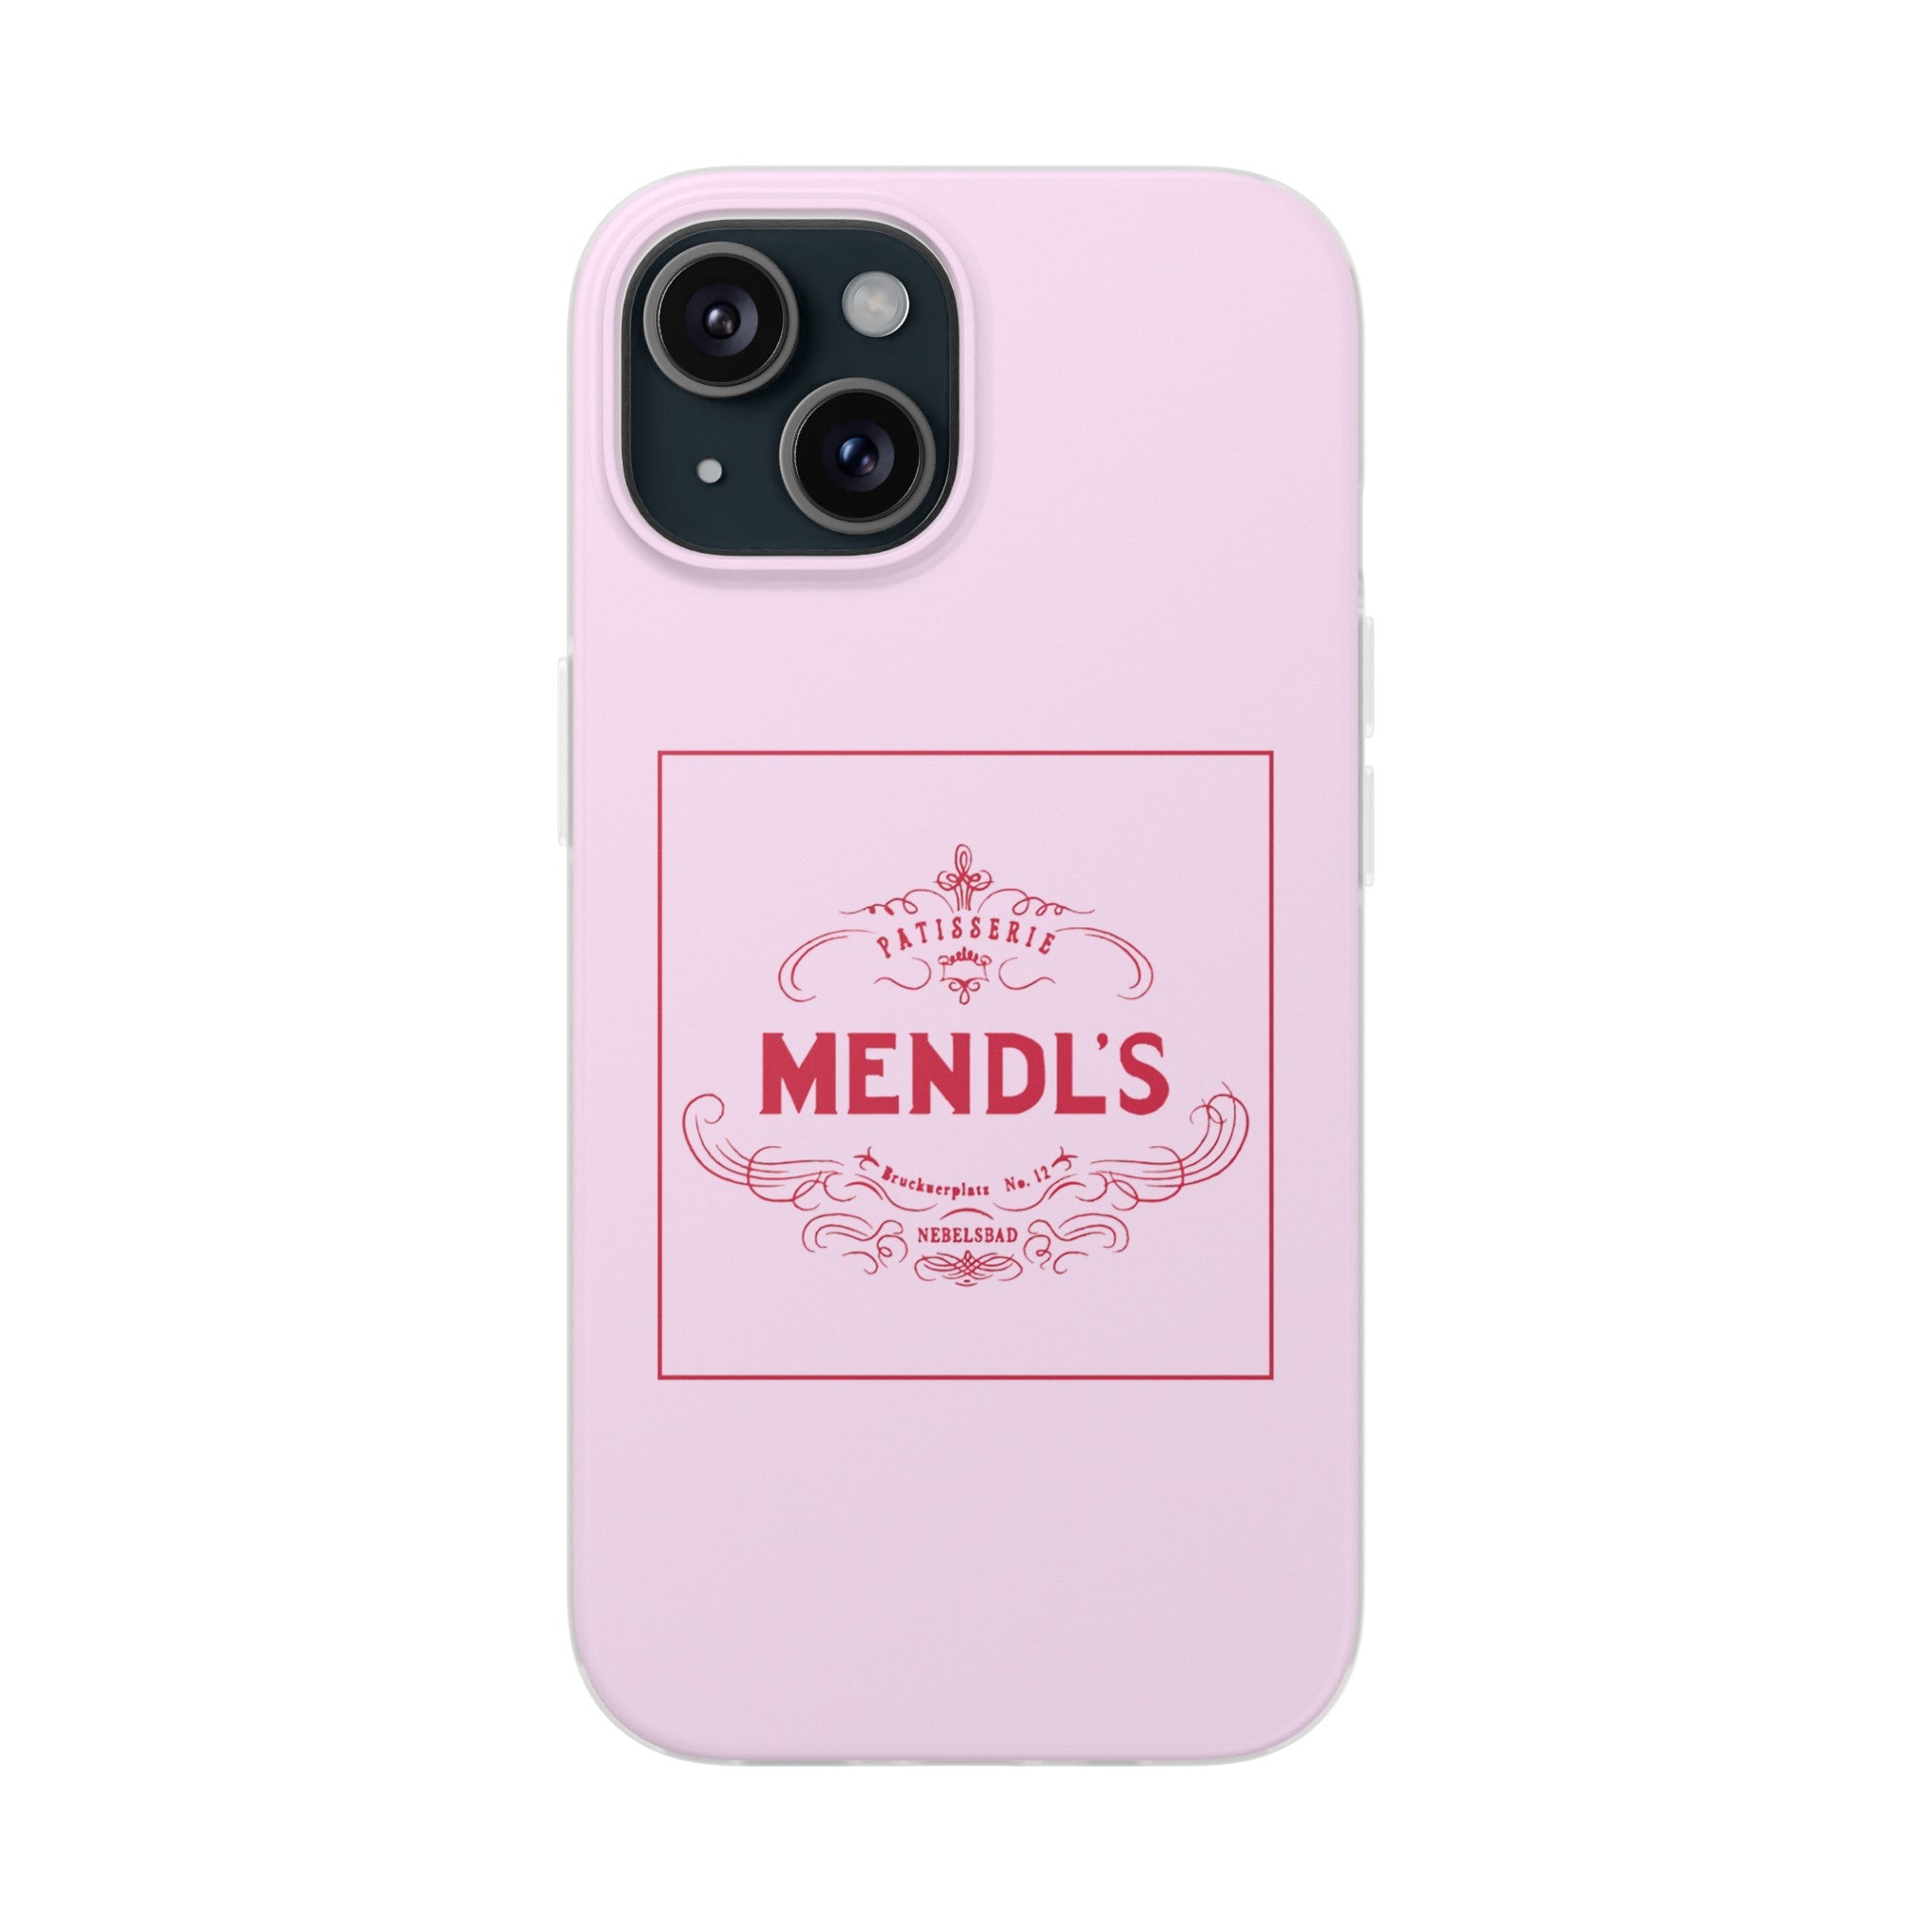 Mendl's The Grand Budapest Hotel - Phone Case